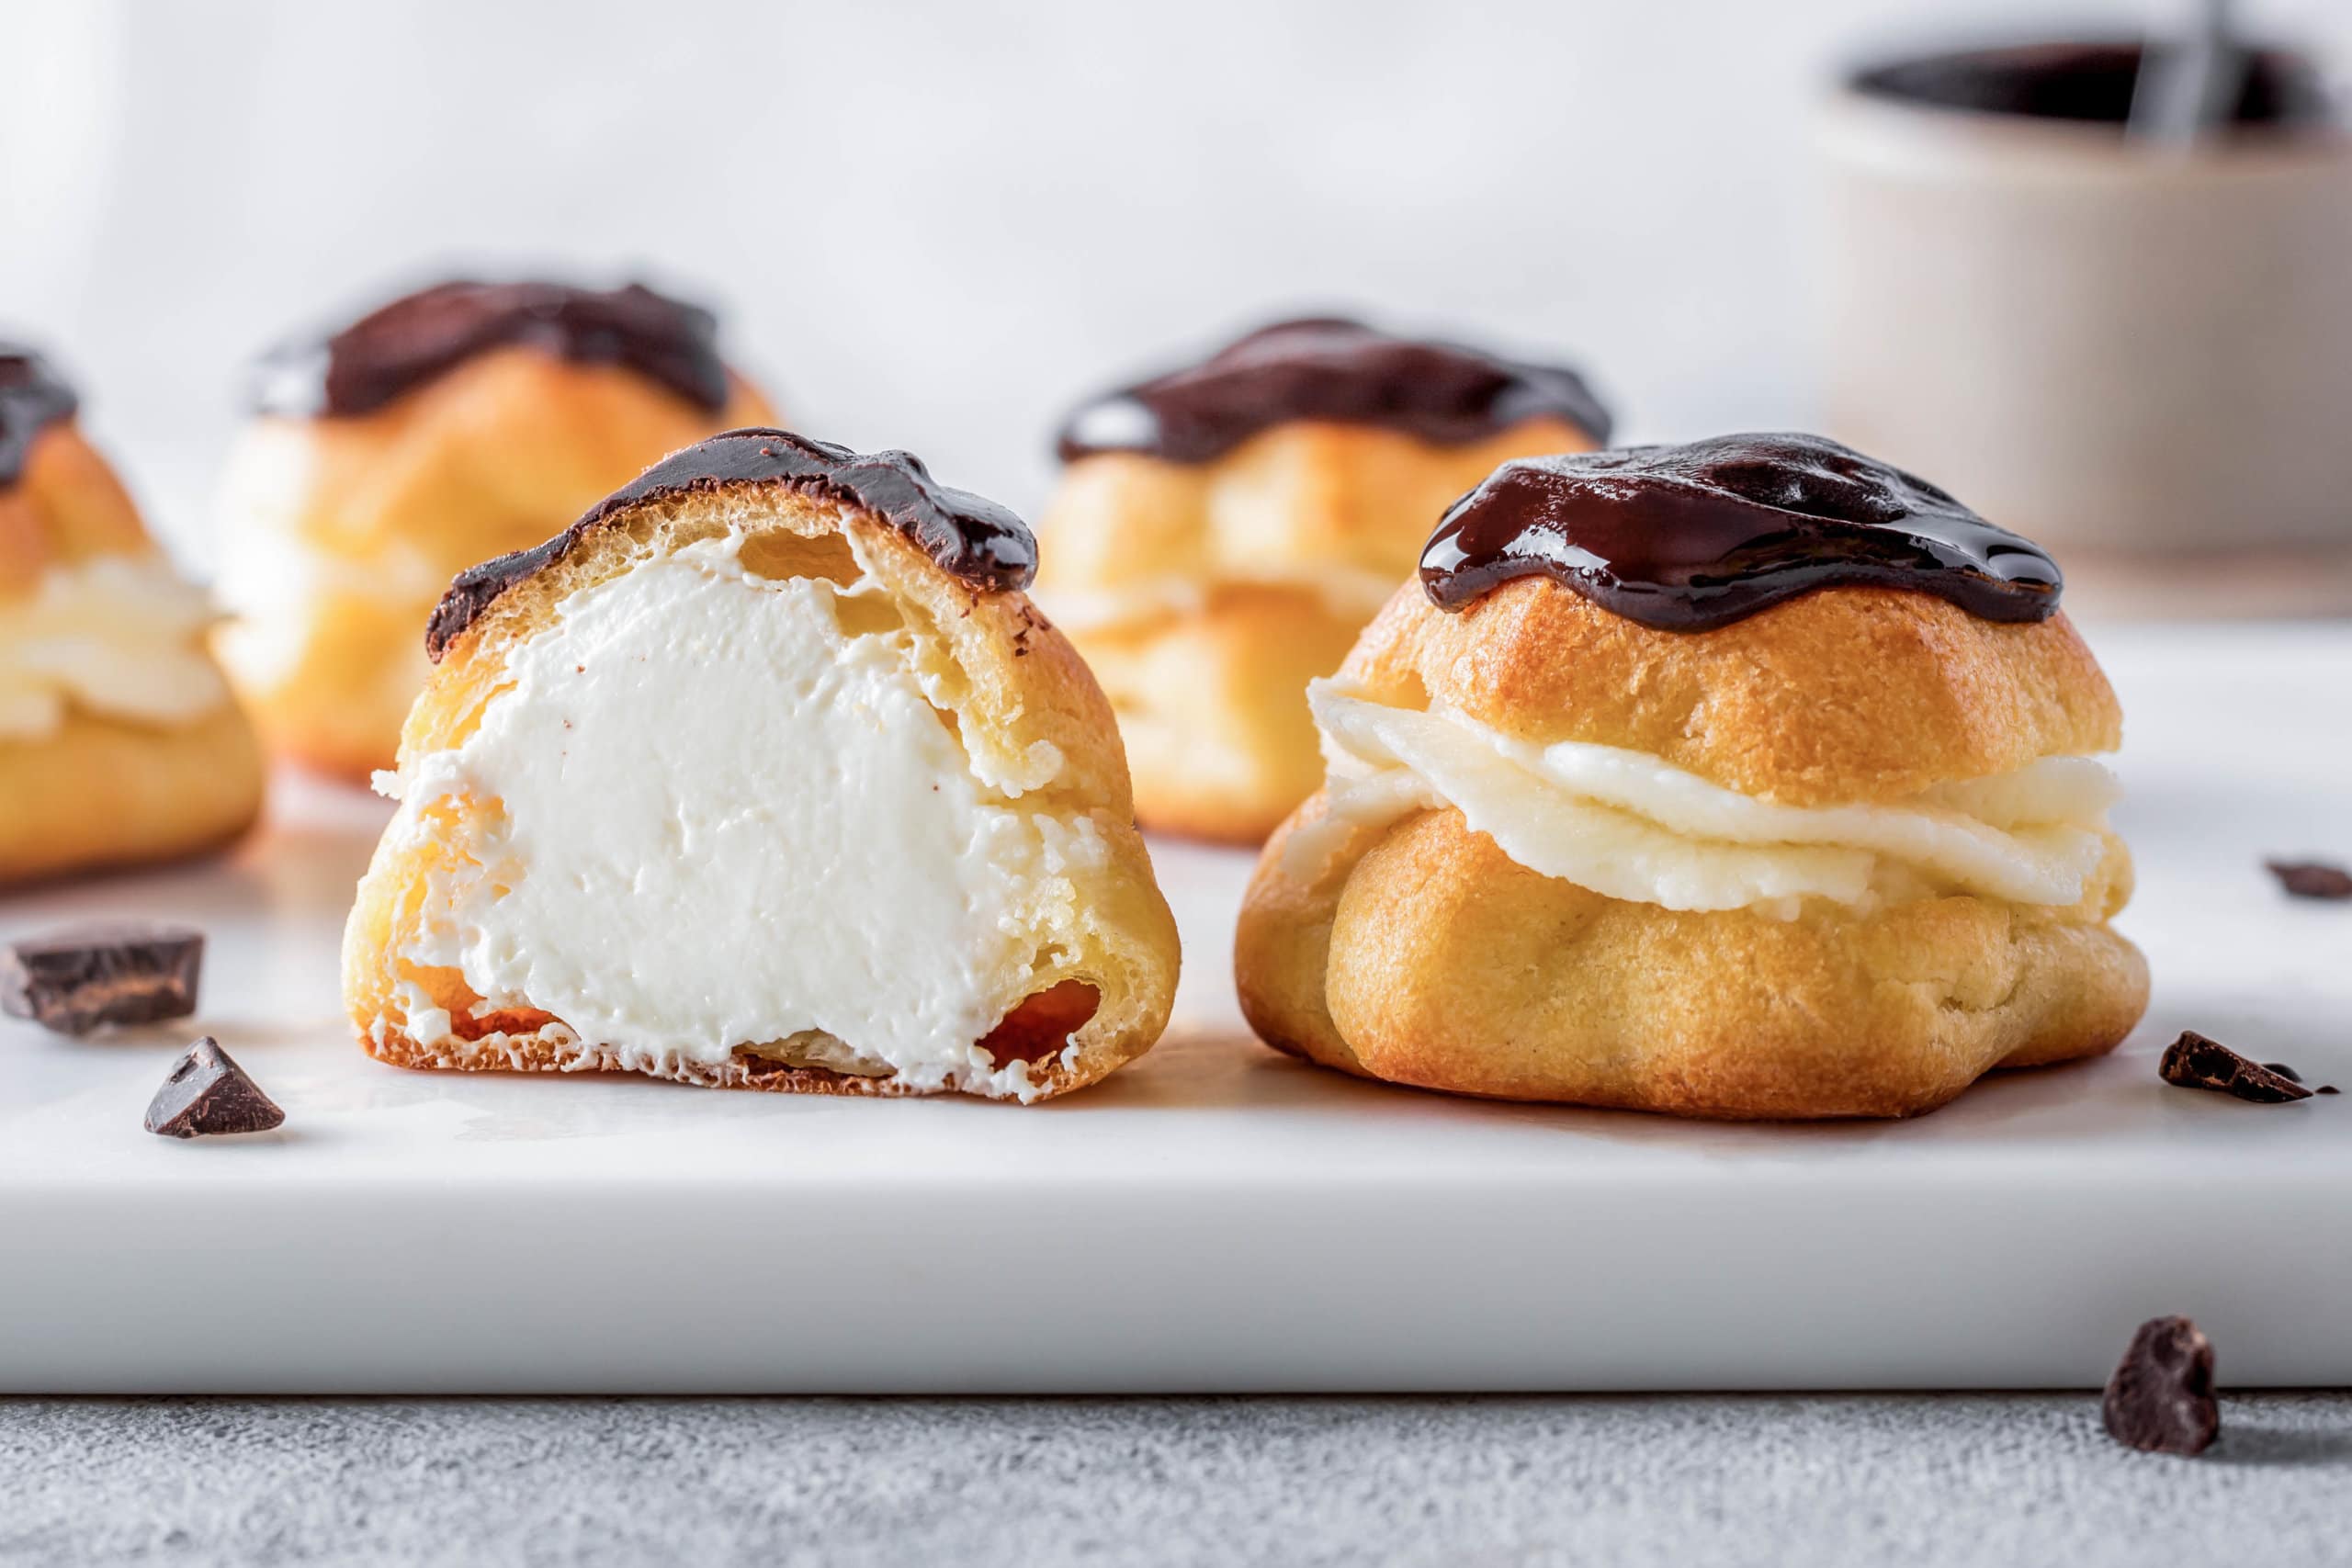 Classic Eclair Recipe with Cream and Chocolate Glaze - All We Eat